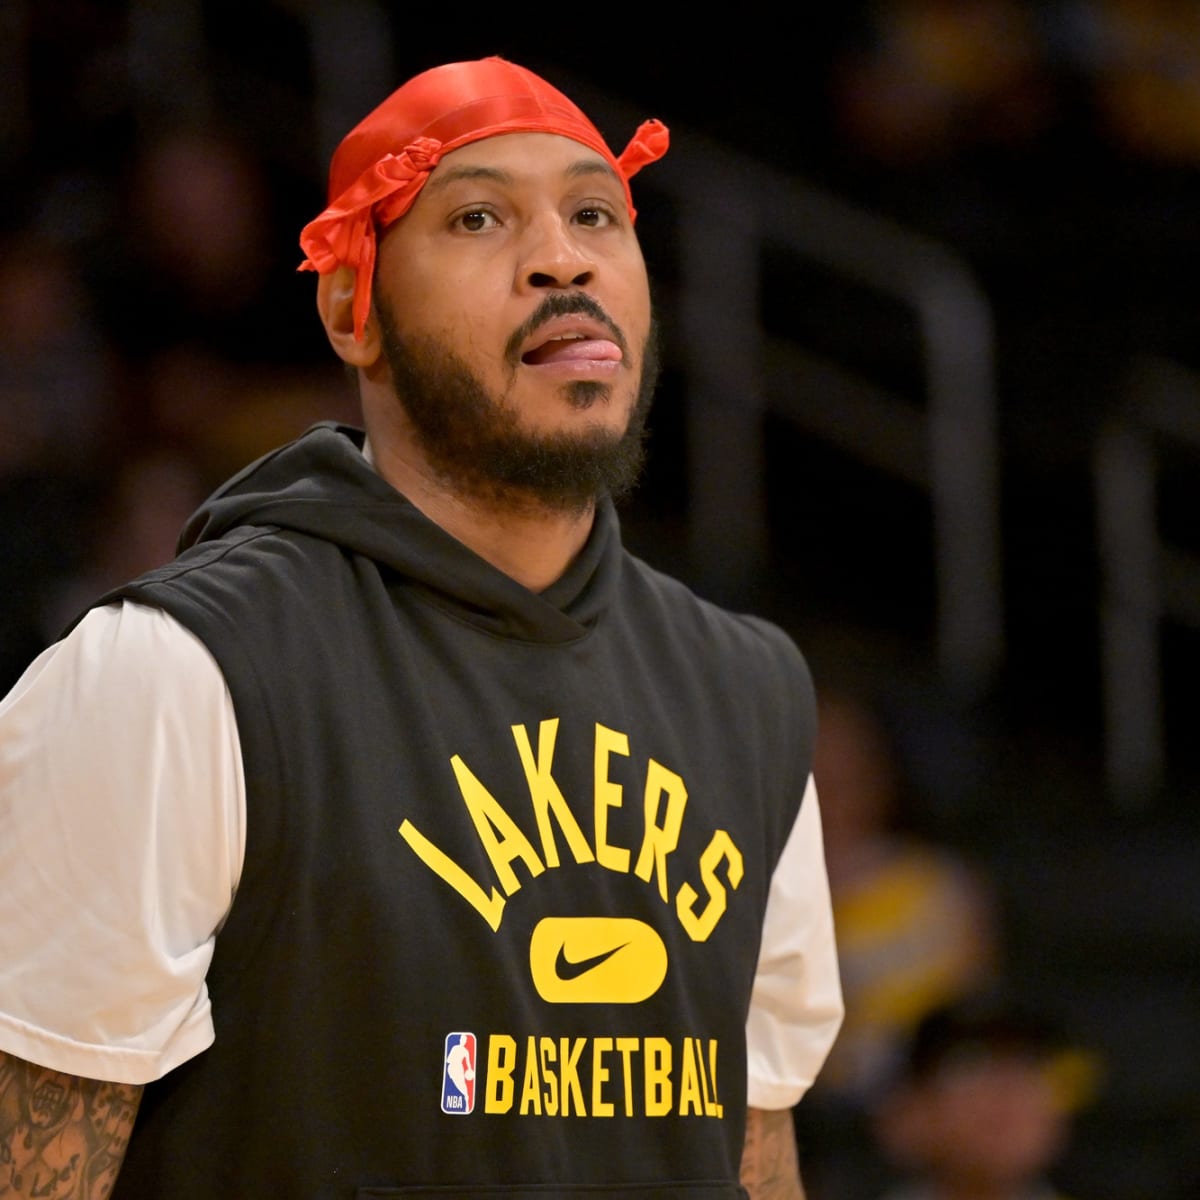 LOOK: Carmelo Anthony dressed diplomatically for the Dodgers-Mets